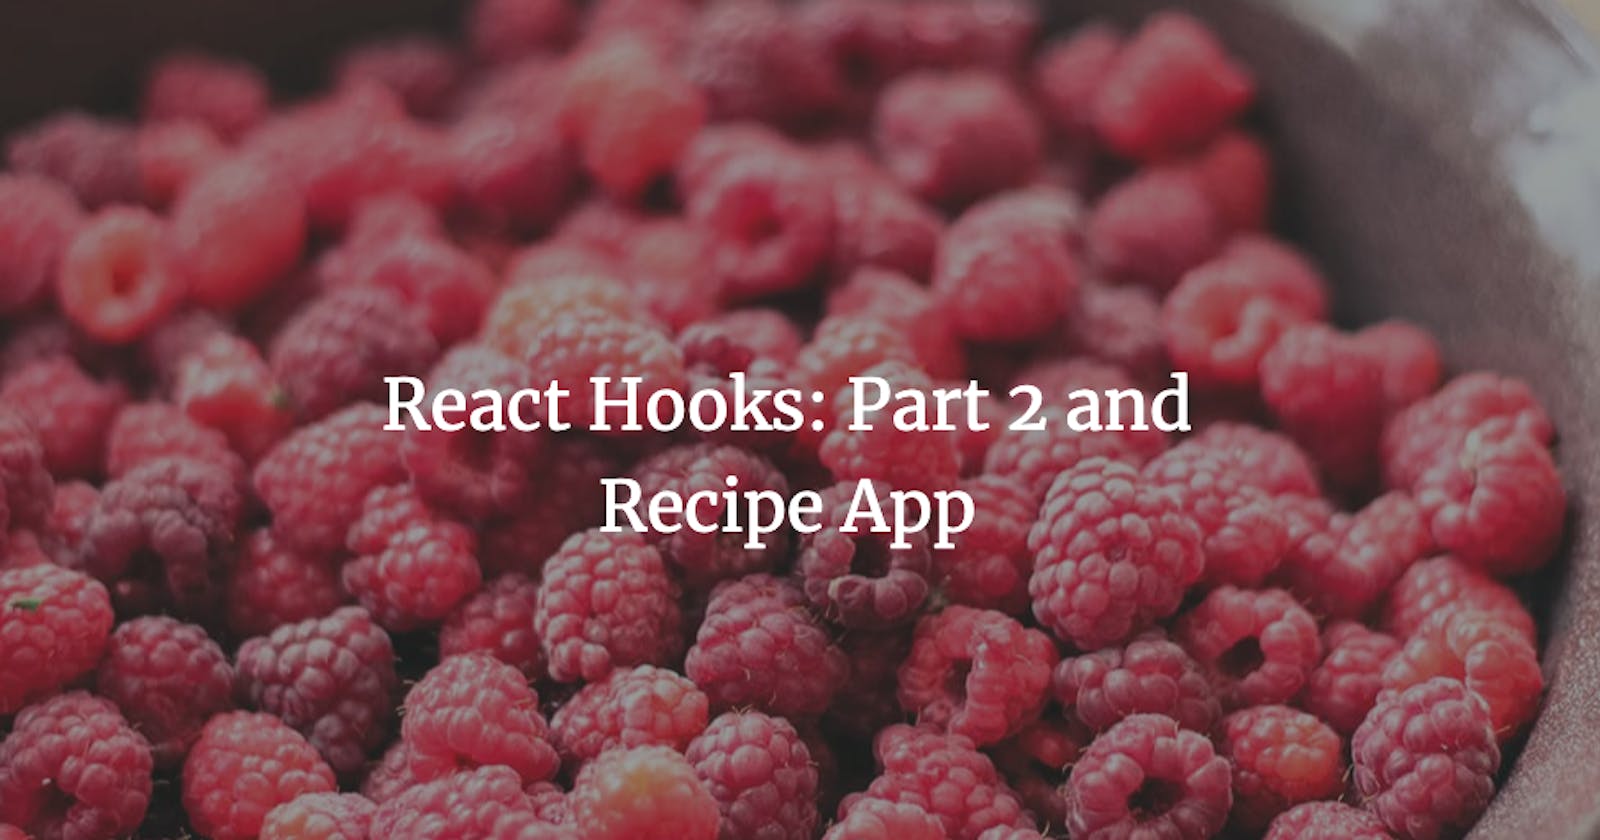 React Hooks: Part 2 and Recipe App